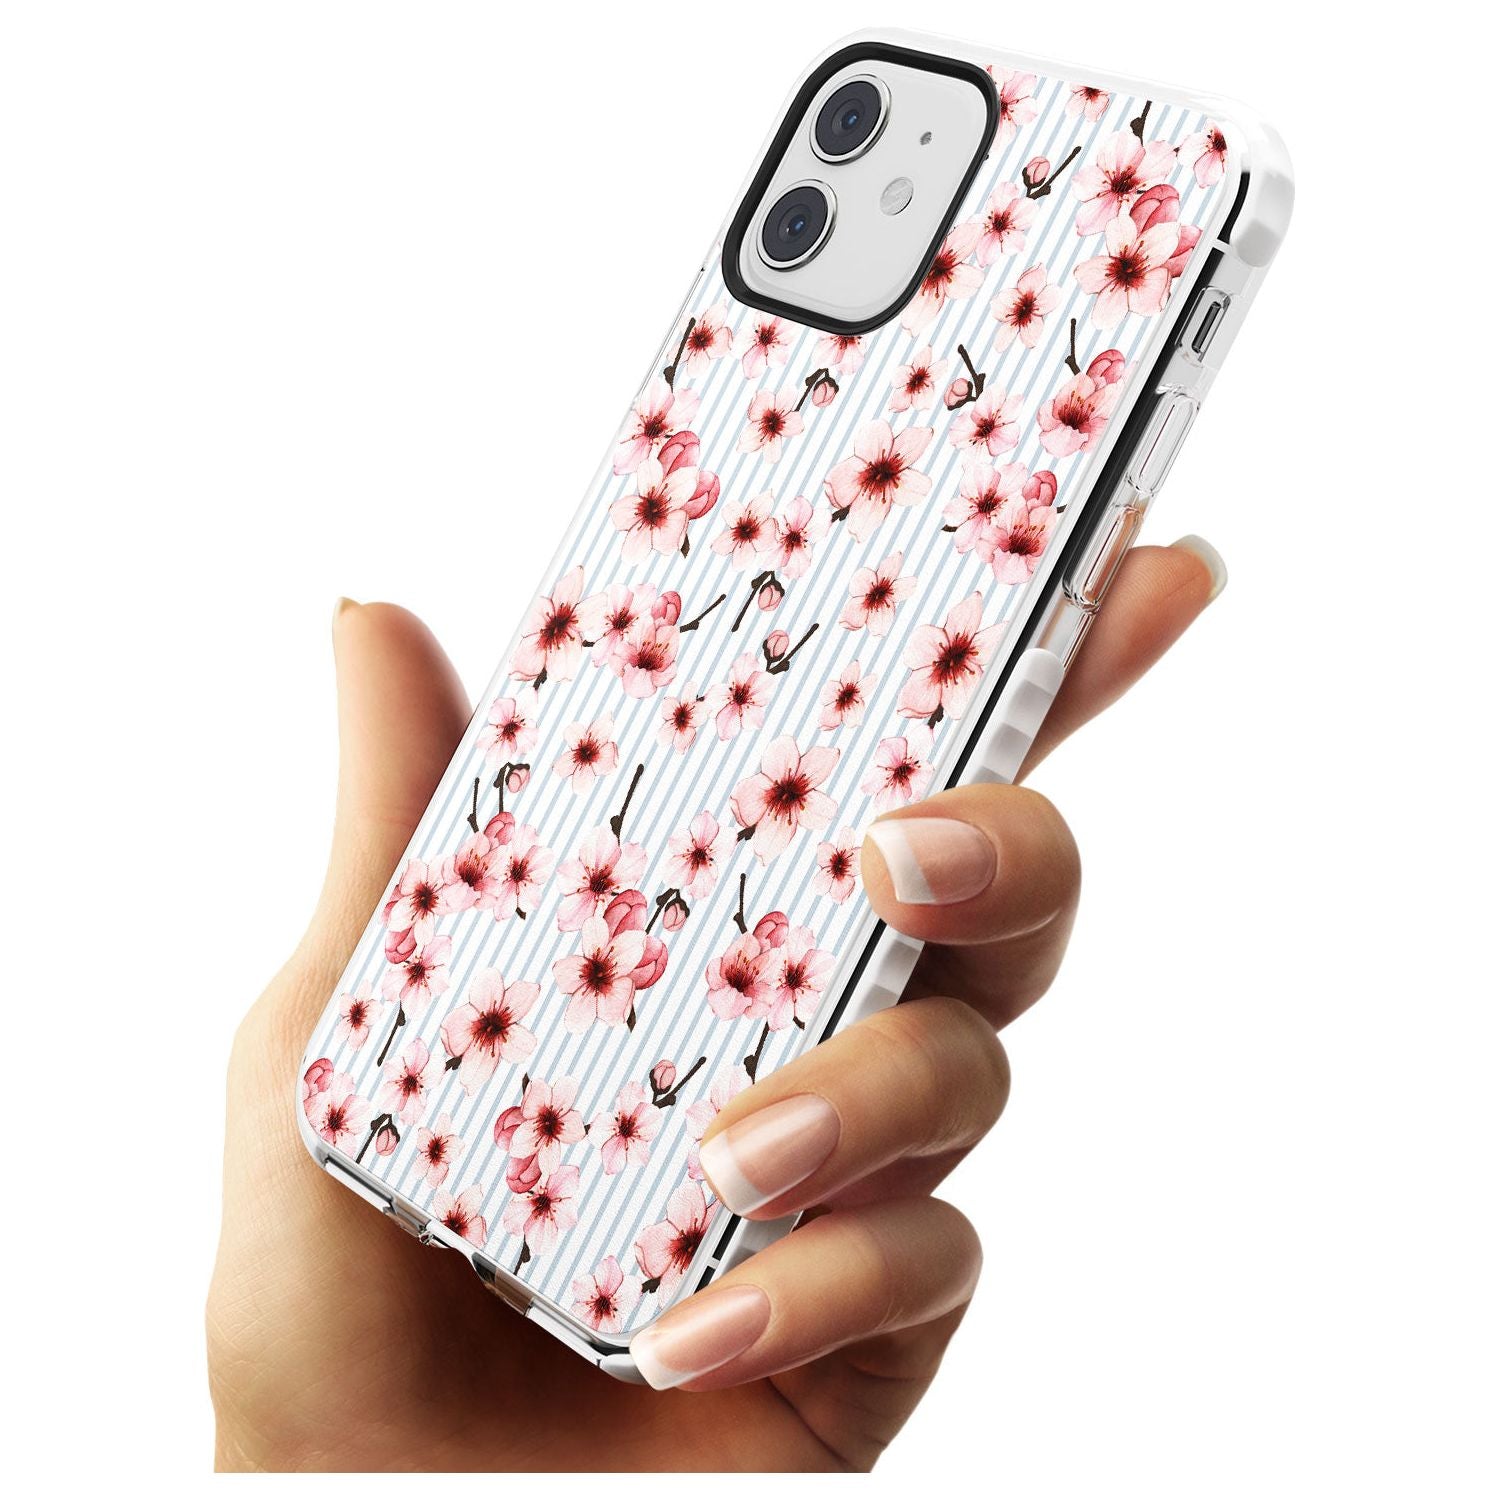 Cherry Blossoms on Blue Stripes Pattern Impact Phone Case for iPhone 11